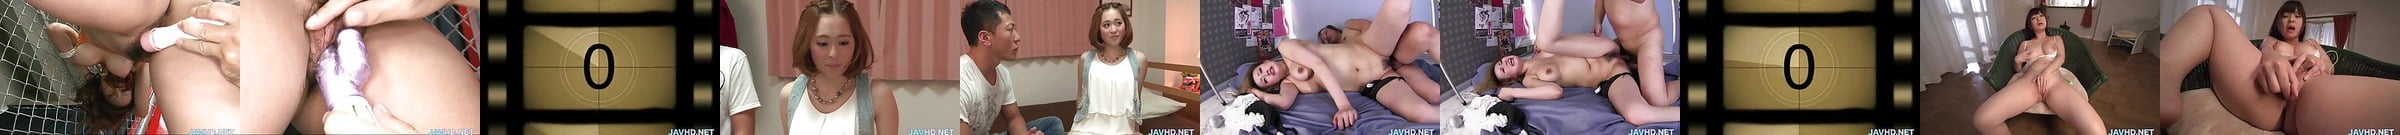 Still Warm Hairy Pussies Straight From Javhd Net Porn A8 Xhamster